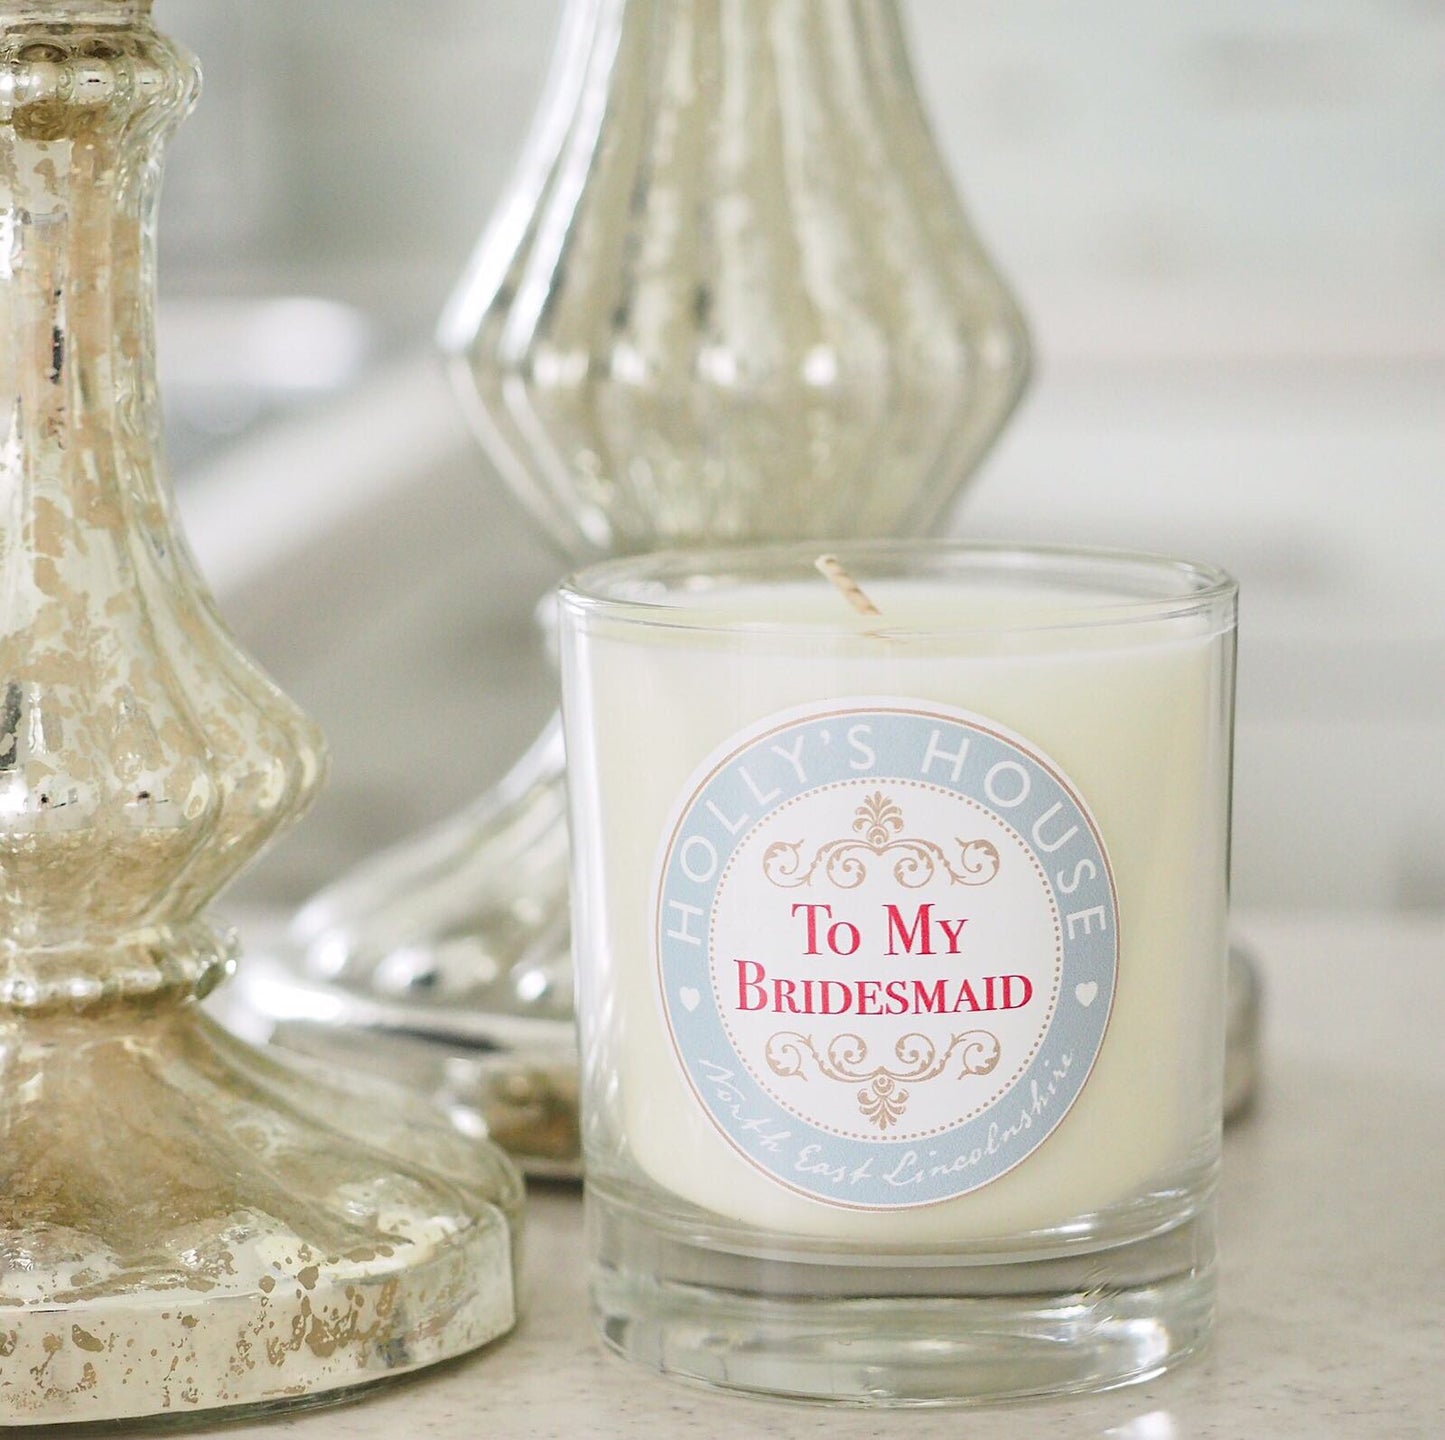 To My Bridesmaid Scented Candle